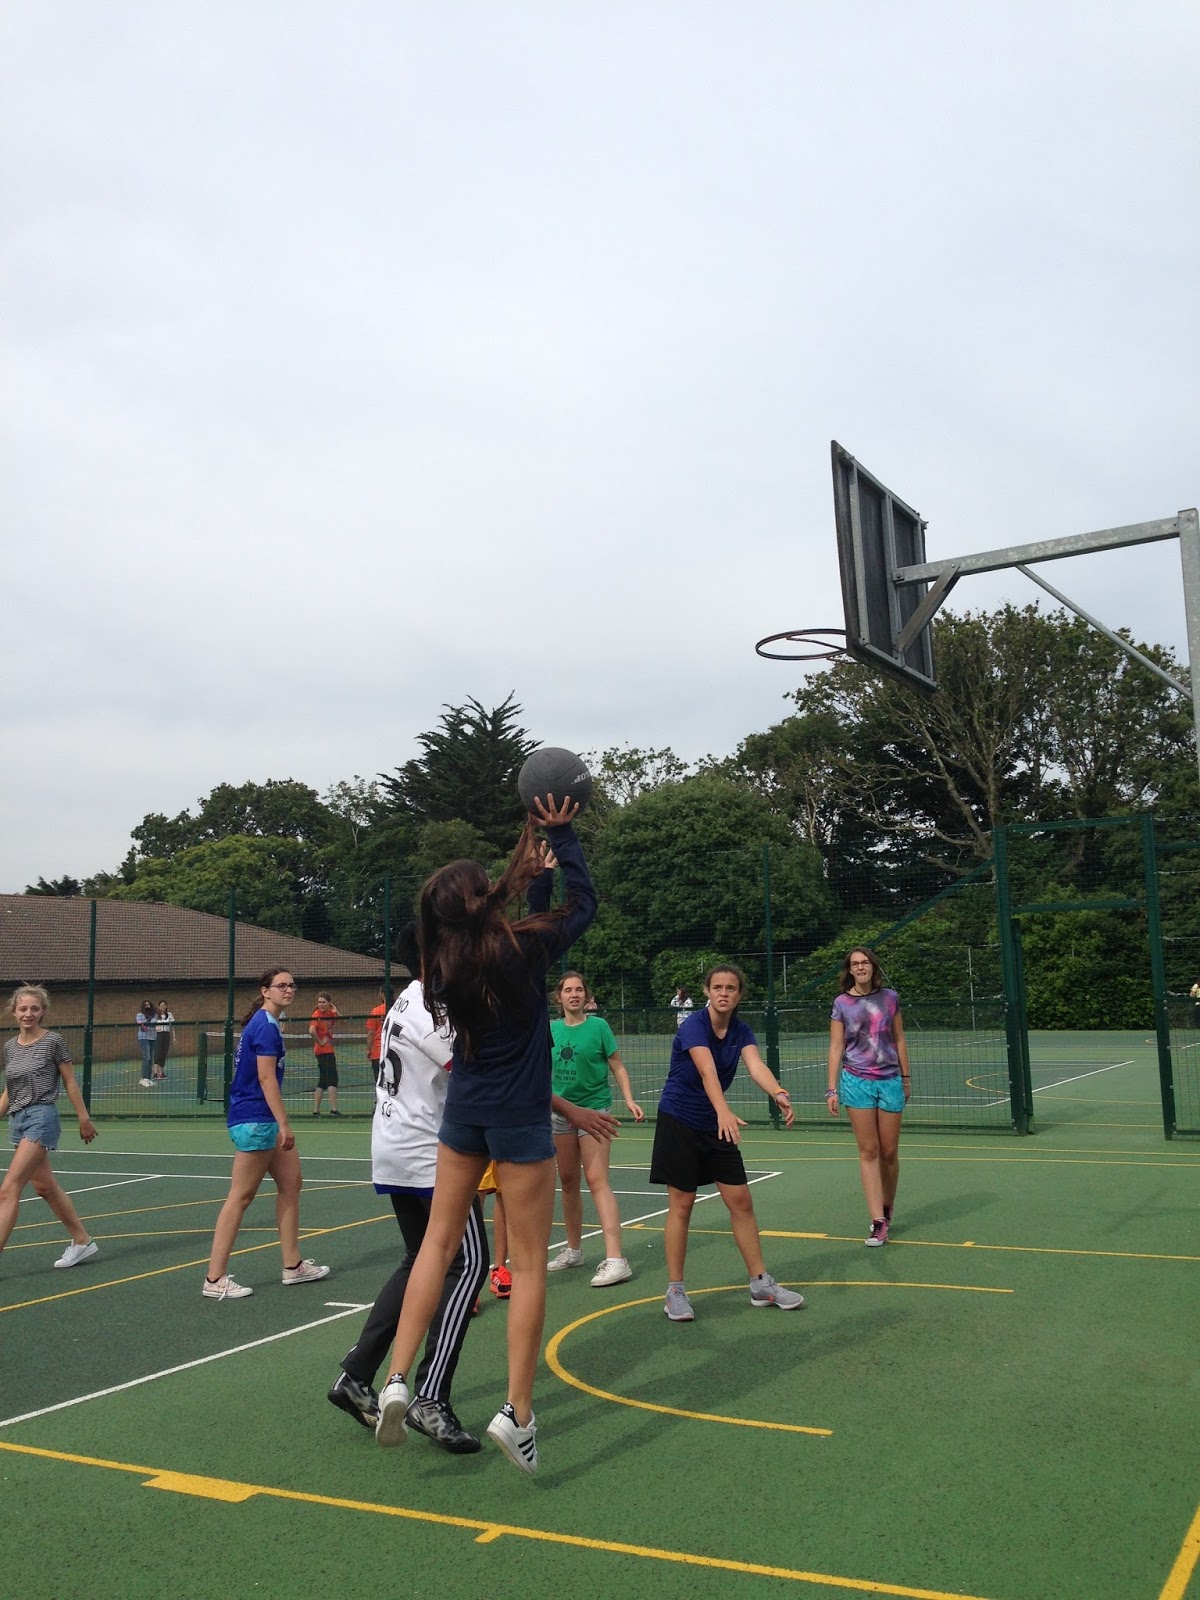 Live from Bournemouth - Southbourne School of English: Beatboxing, basketball, tennis ...1200 x 1600